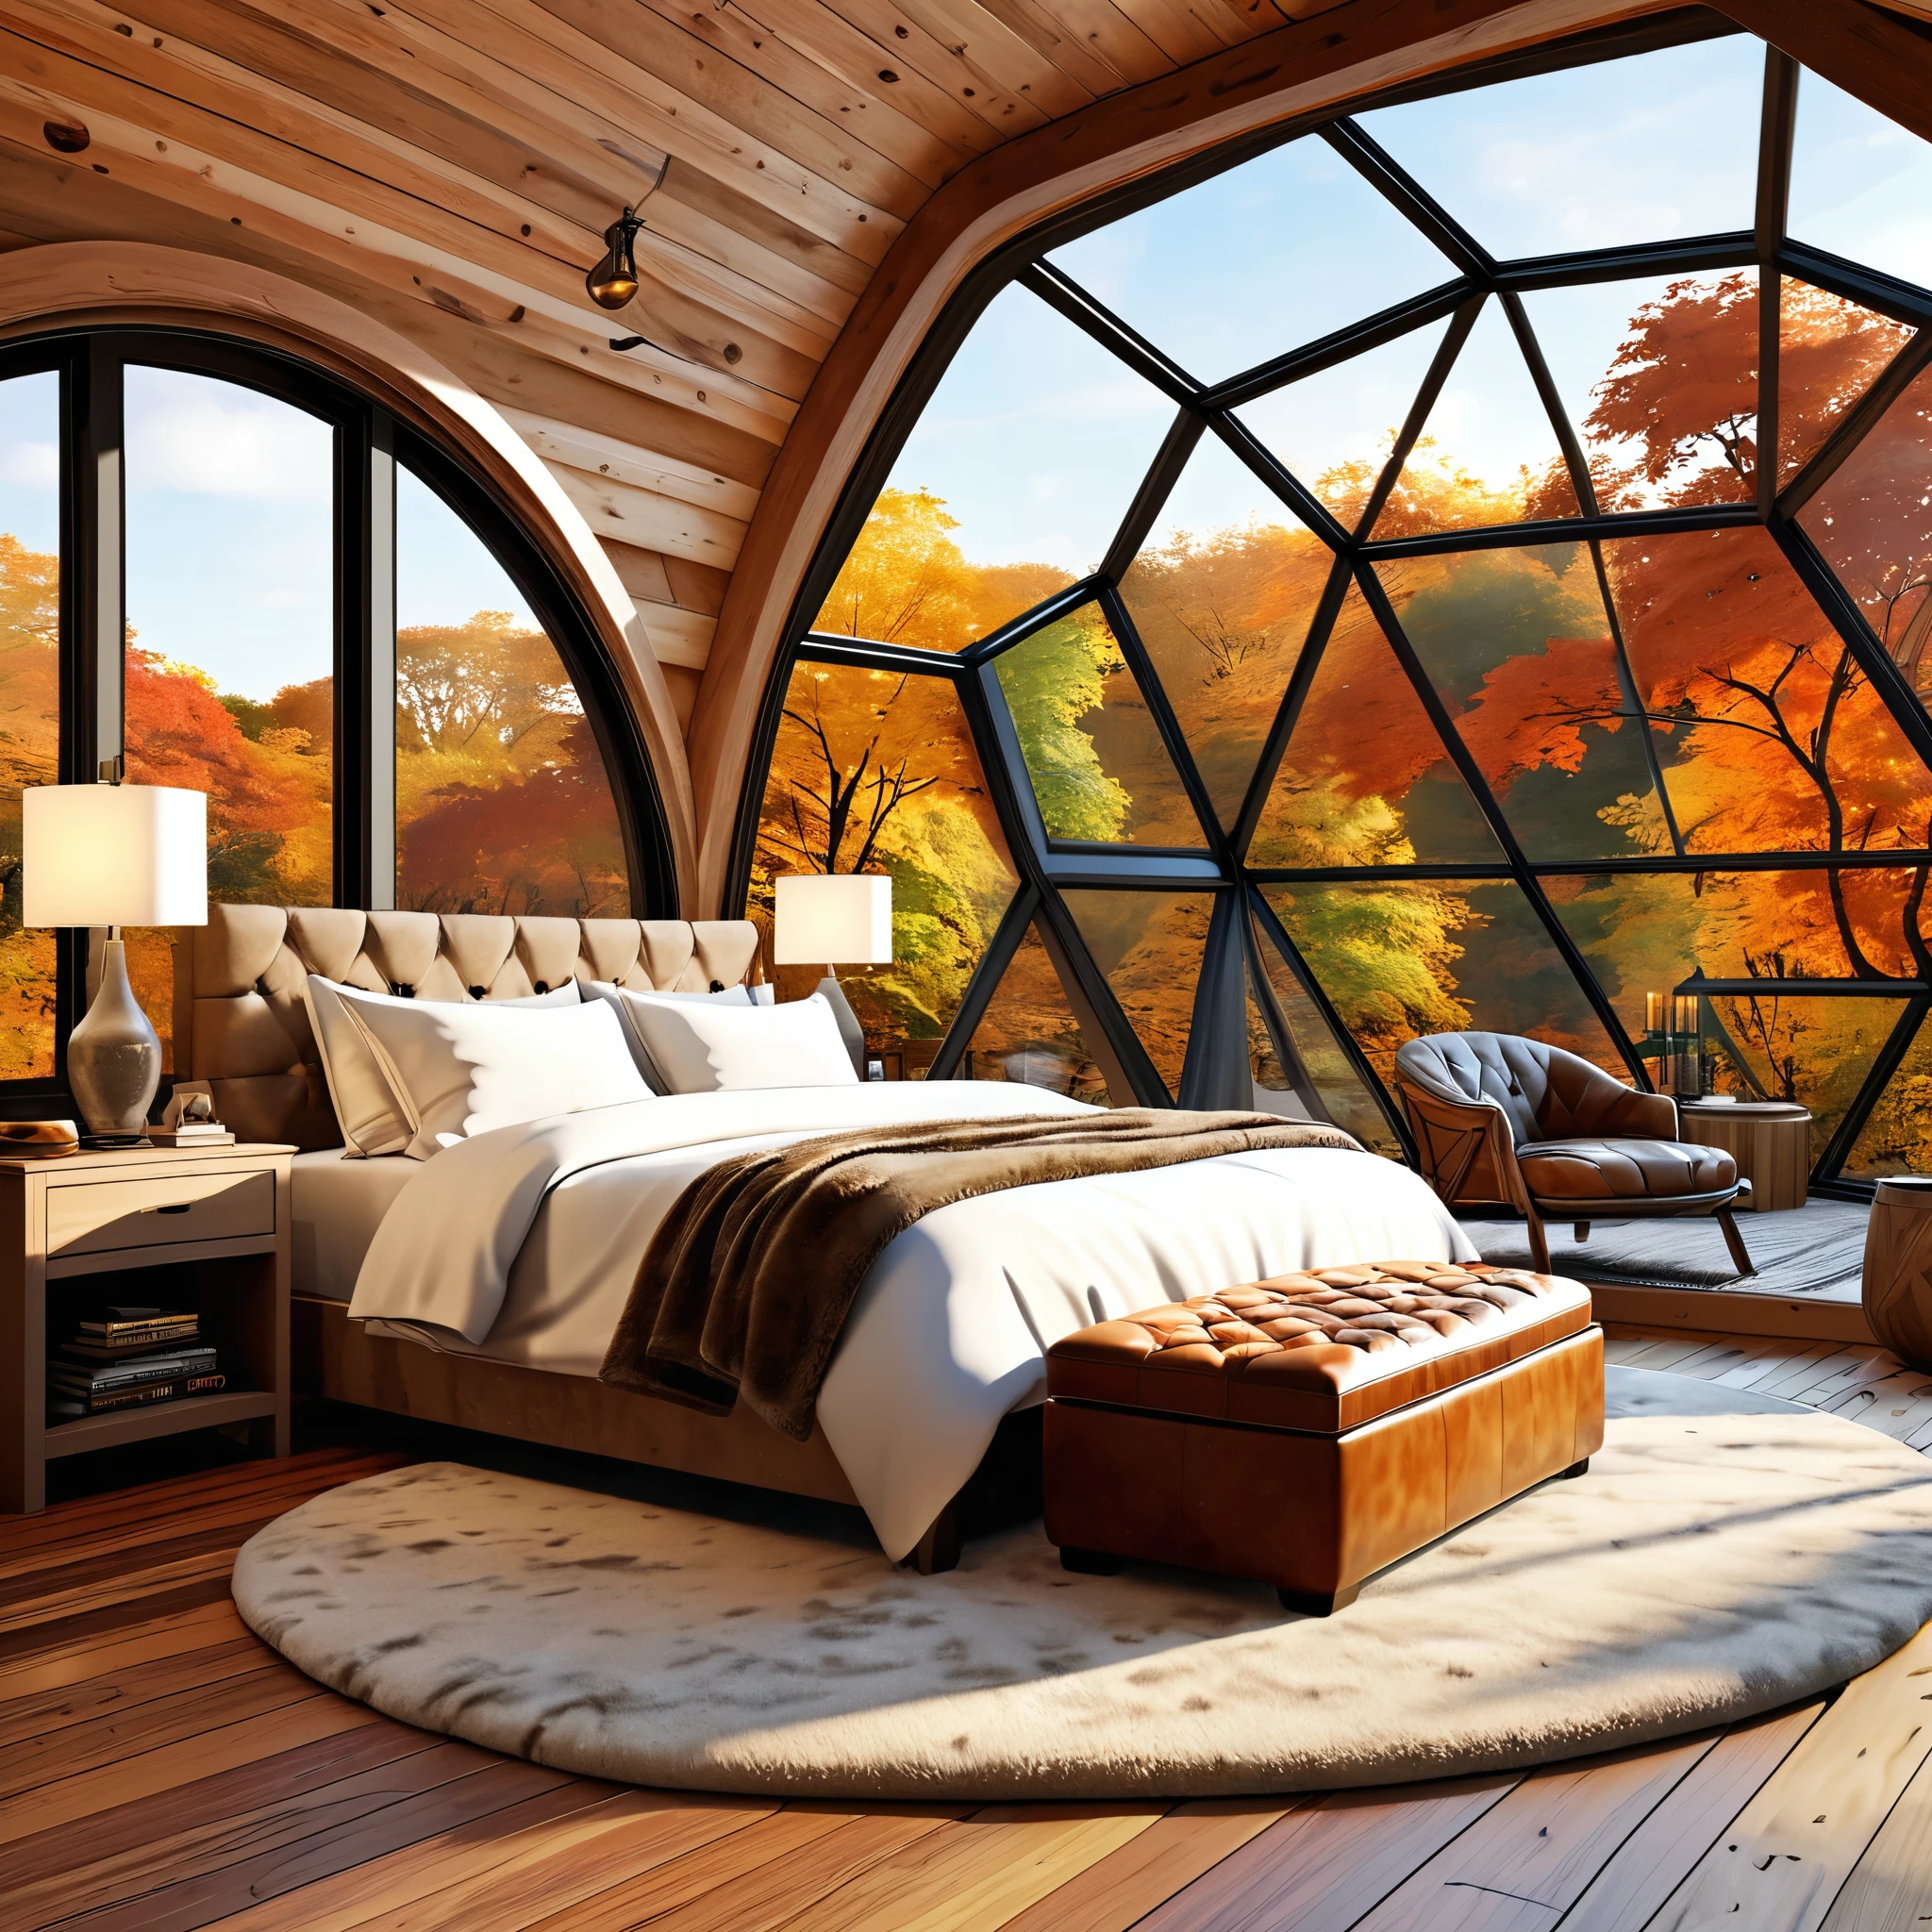 Design a sophisticated and cozy bedroom within a geodesic dome, featuring large windows that offer breathtaking views of autumn leaves. The room should have a comfortable bed with soft pillows and blankets, bedside lamps providing gentle illumination, and a stylish ottoman. Include a cozy armchair draped with a fur throw for a relaxing corner. The wooden floor should be complemented by a fluffy rug to enhance the warmth of the space. Add a small bookshelf and select decorative items to give the room an elegant yet homey feel.